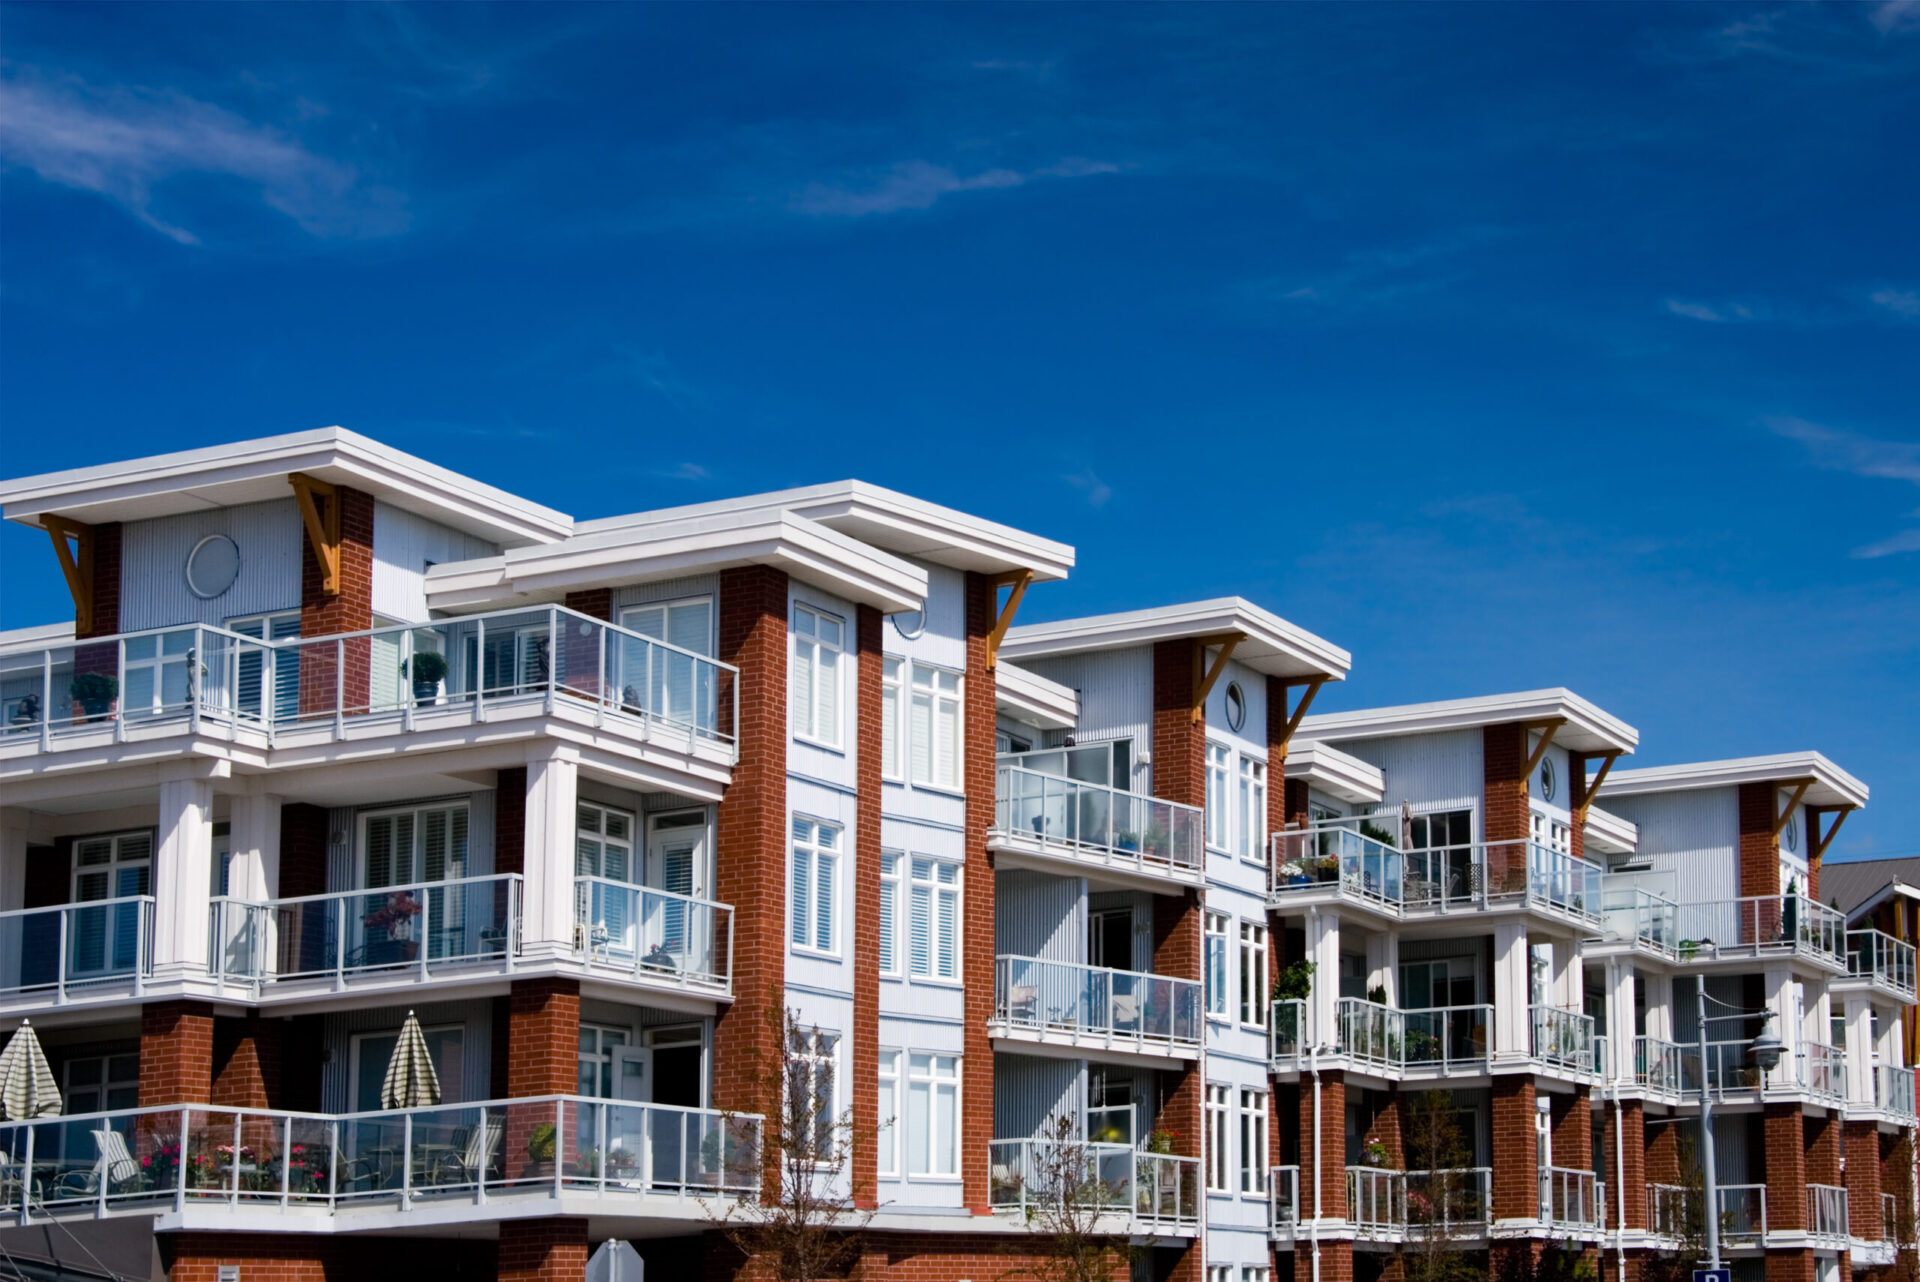 Multifamily Investment Opportunities Slipping As Property Prices, Rates Rise